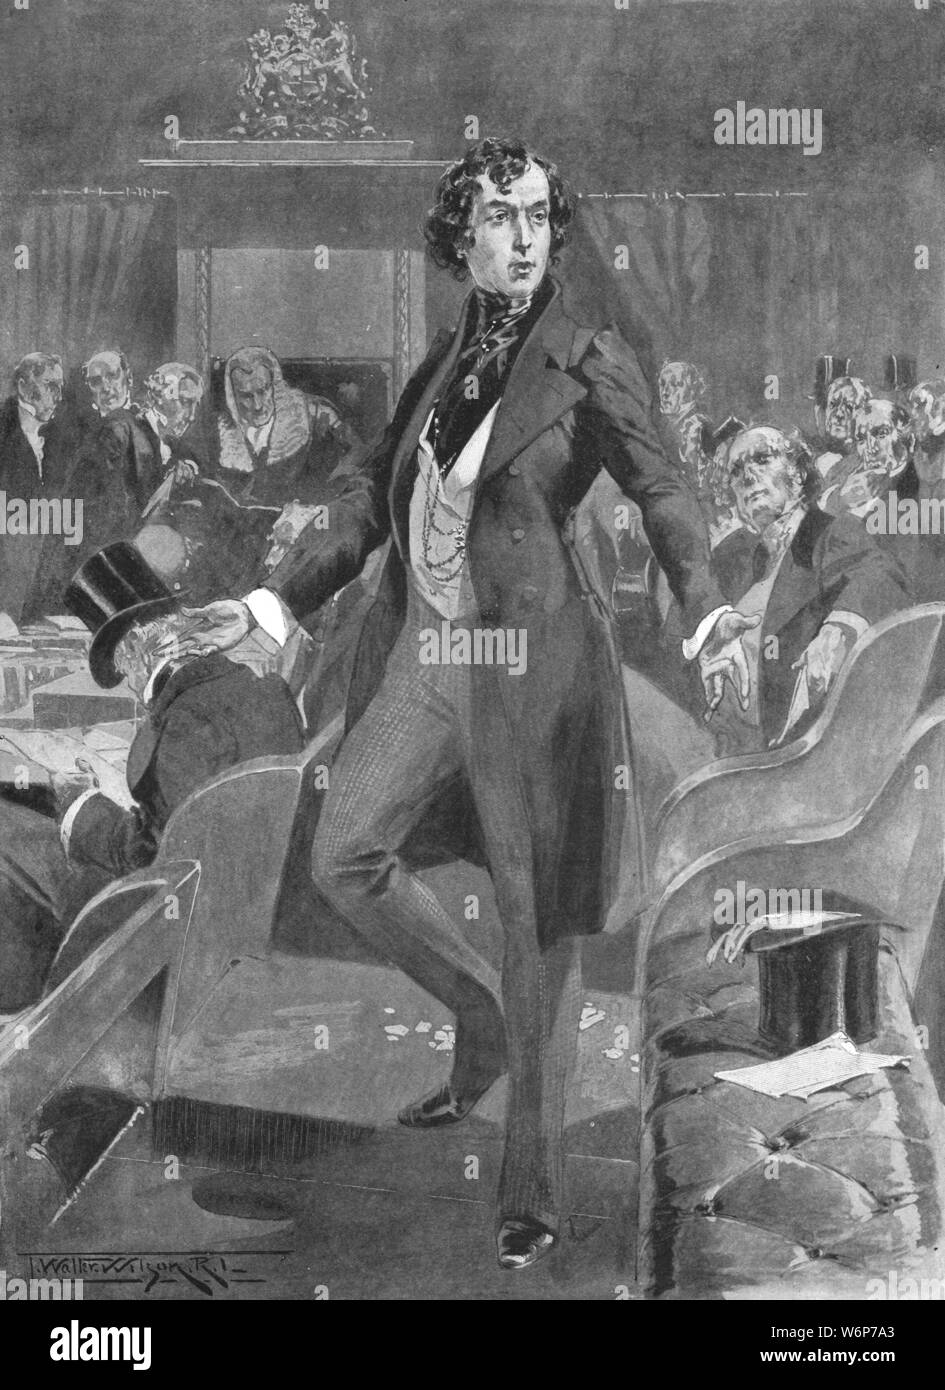 'Disraeli's First Speech in the House of Commons', London, 7 December 1837,(1901). British Conservative statesman Benjamin Disraeli (1804-1881) was elected Tory MP for Maidstone in 1837. He went on to become one of the foremost British statesmen of the Victorian era, serving as Prime Minister in 1868 and from 1874-1880. From &quot;The Illustrated London News Record of the Glorious Reign of Queen Victoria 1837-1901: The Life and Accession of King Edward VII. and the Life of Queen Alexandra&quot;. [London, 1901] Stock Photo